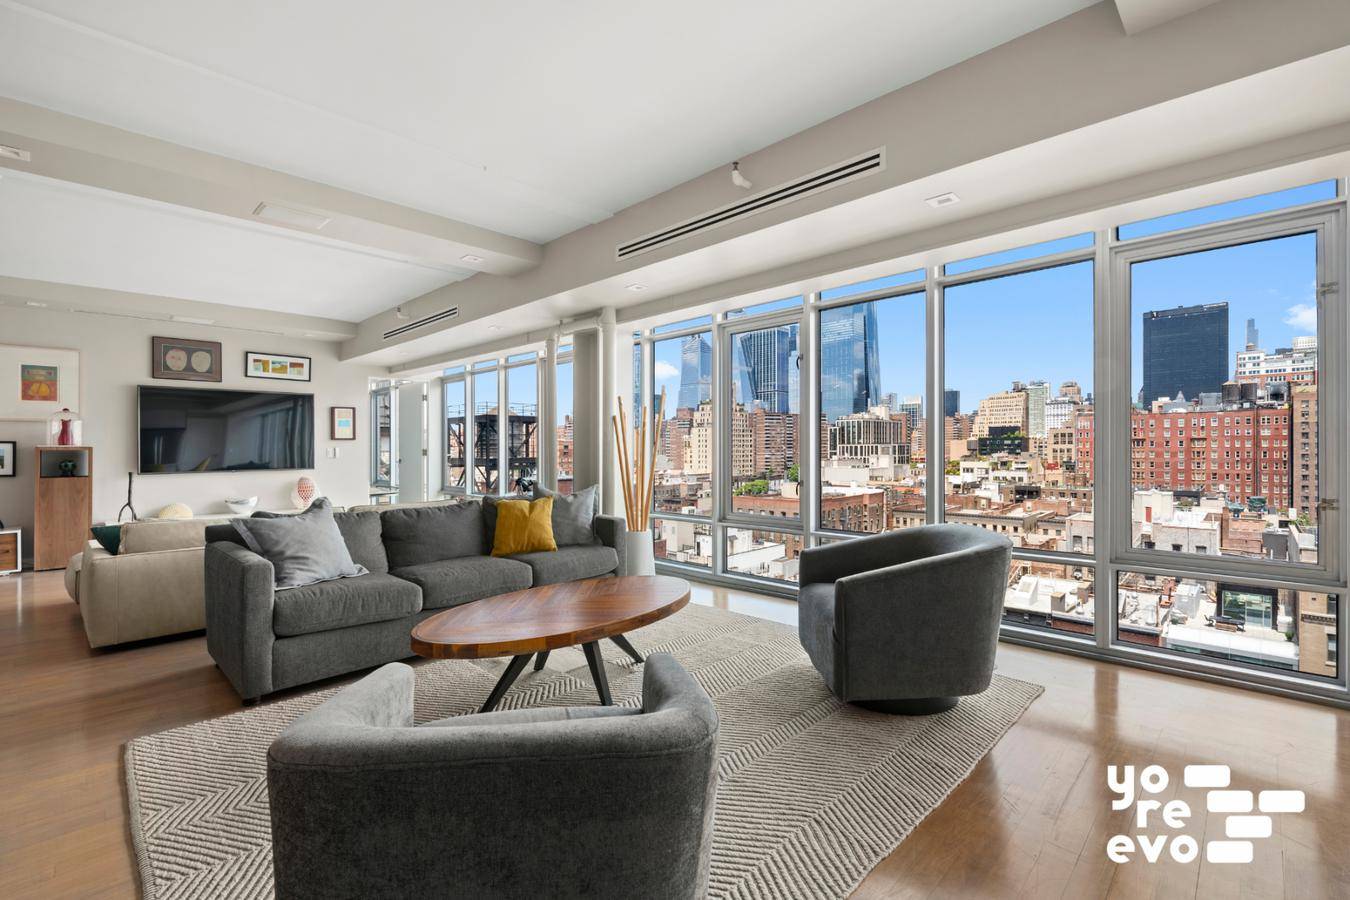 Welcome to the Penthouse 2, 400 square feet of perfection in the heart of Chelsea.